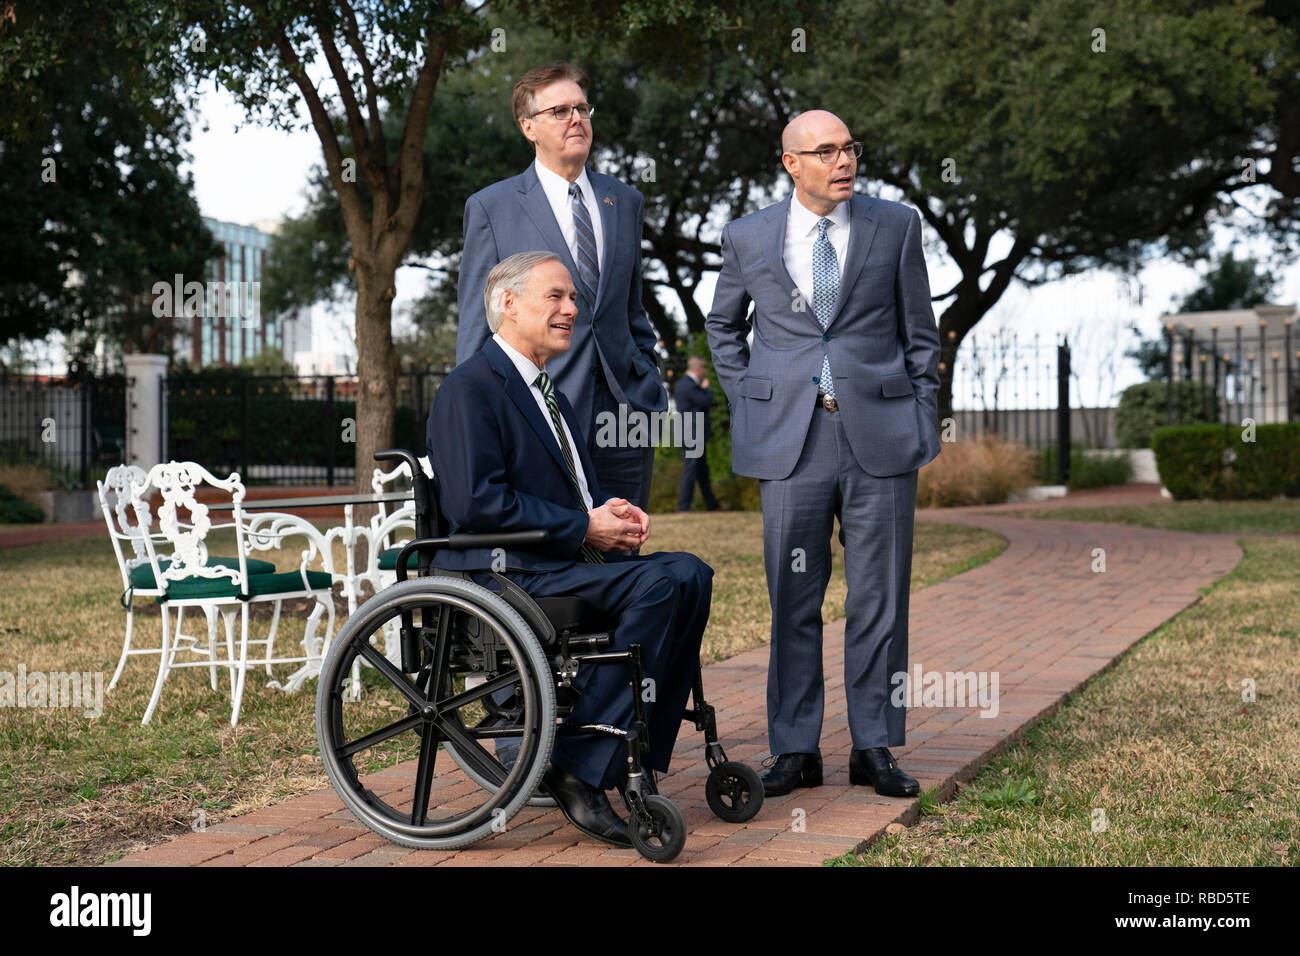 Texas political leaders Gov. Greg Abbott (in chair), Lt. Gov. Dan Patrick, and House Speaker Dennis Bonnen walk on the grounds of the Texas Governor's Mansion in Austin before meeting the press at the start of the 86th legislative session. Stock Photo